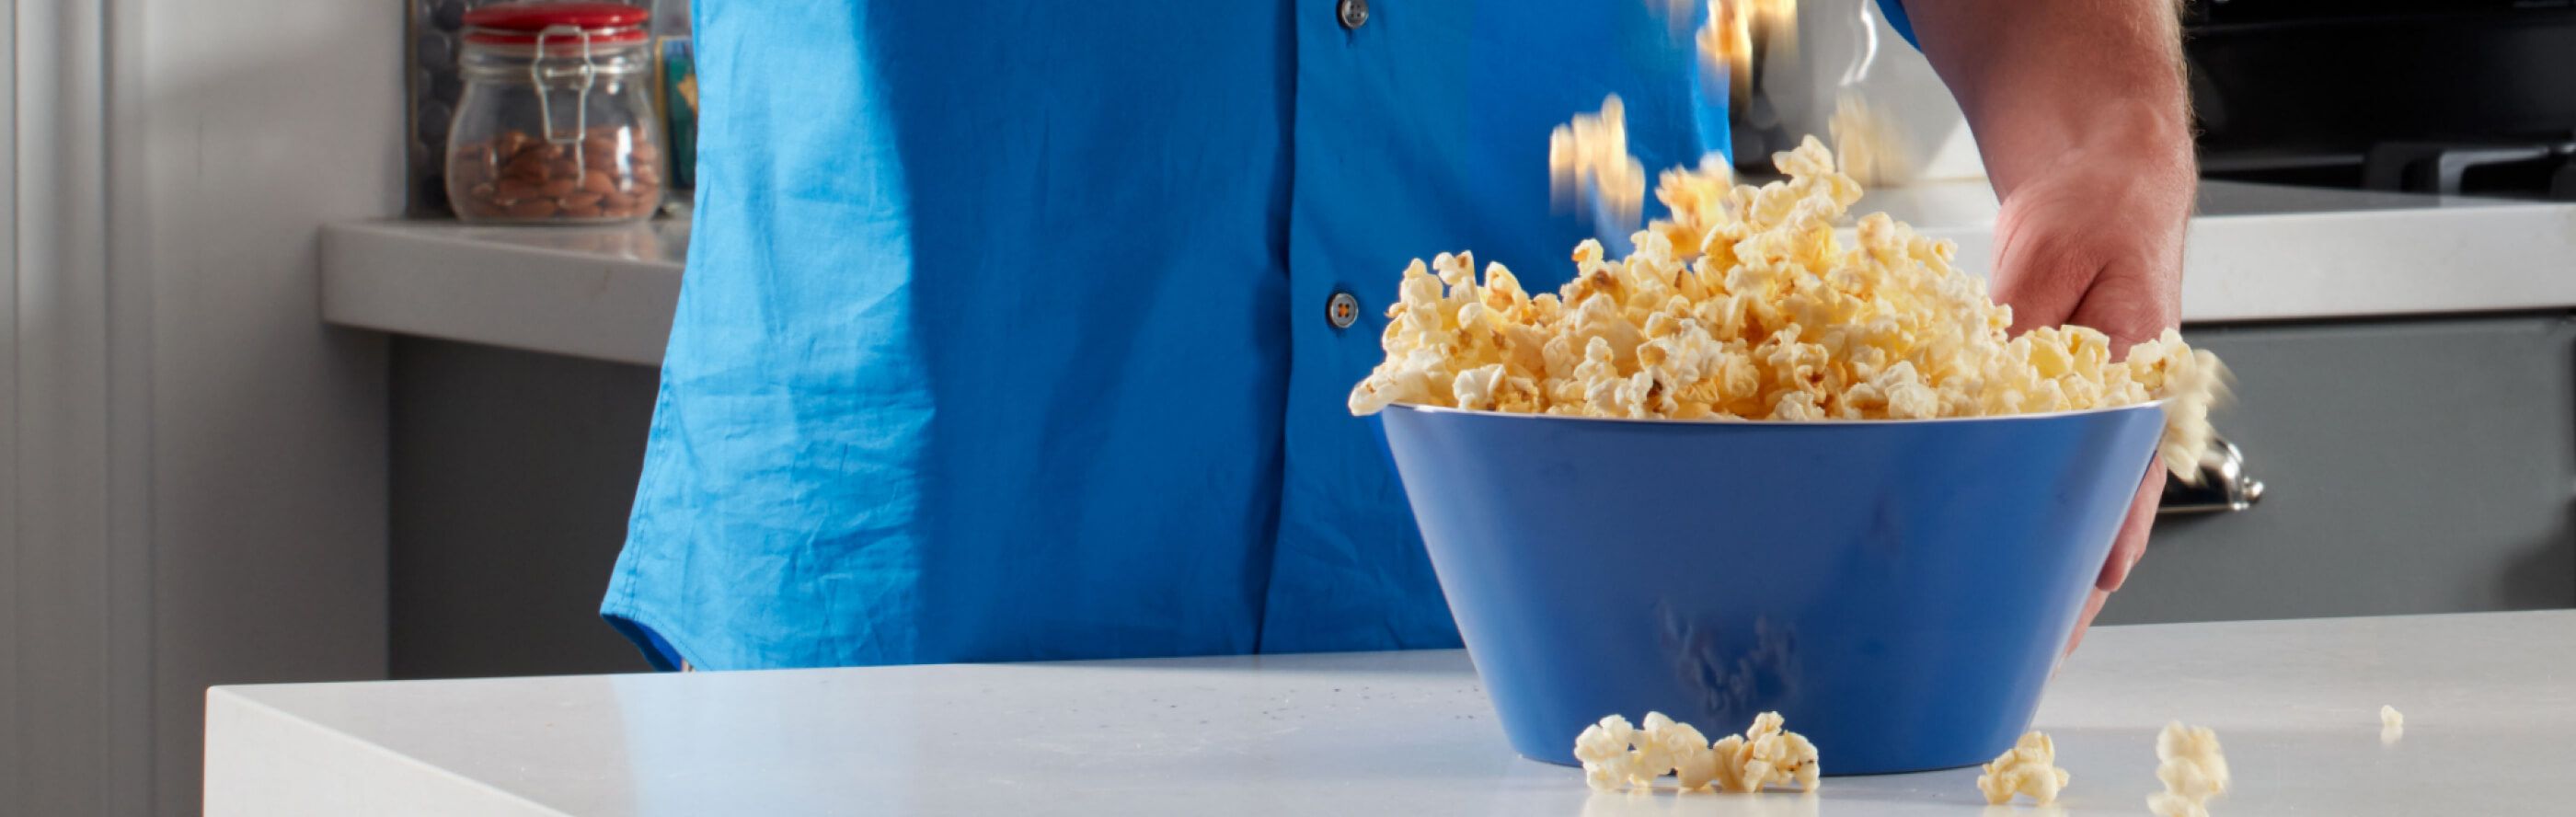 Blue bowl of popcorn on a countertop